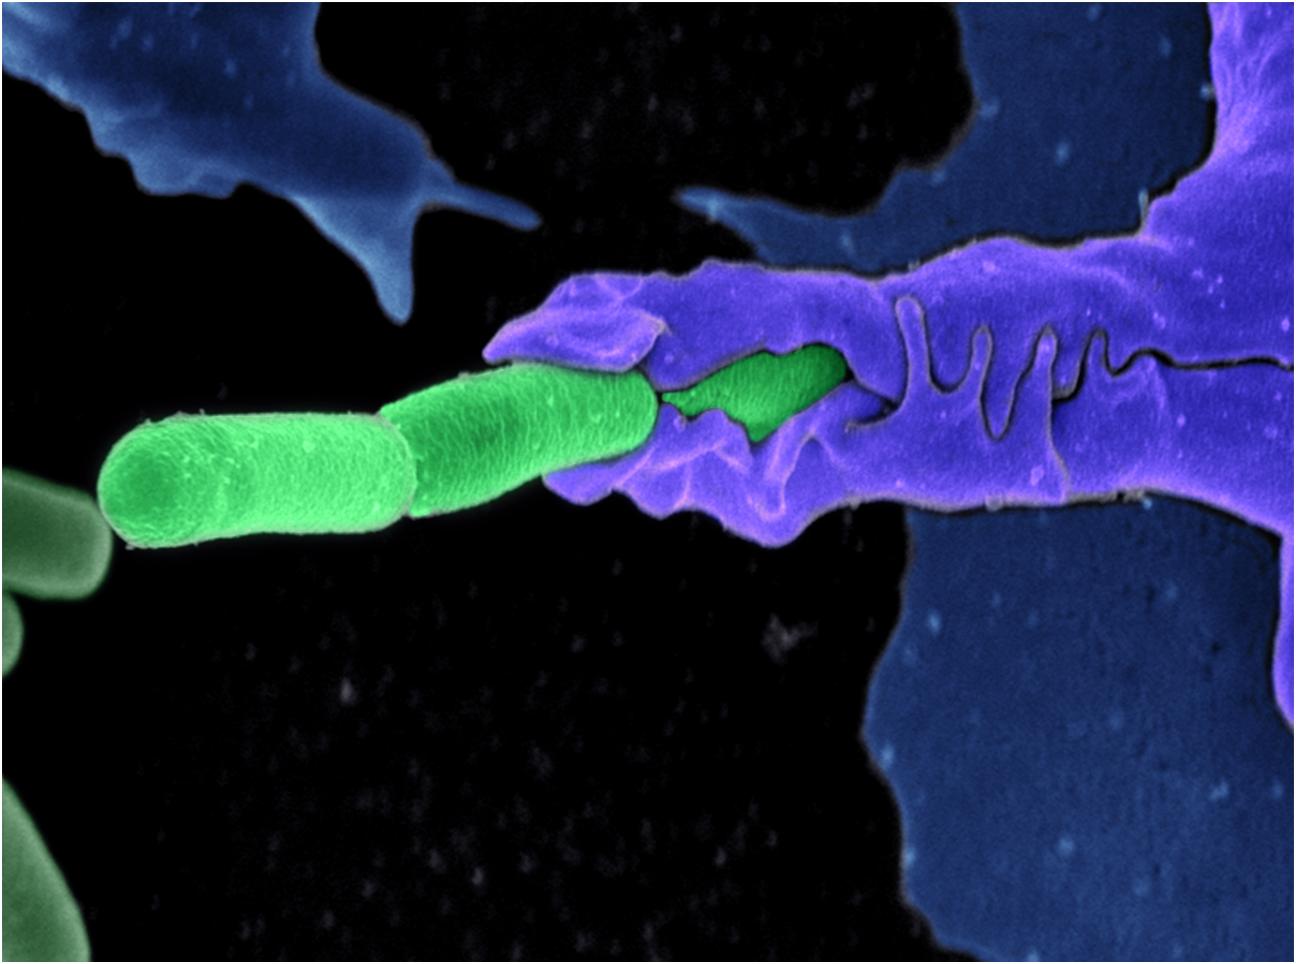 Anthrax bacteria (green) being swallowed by an immune system cell